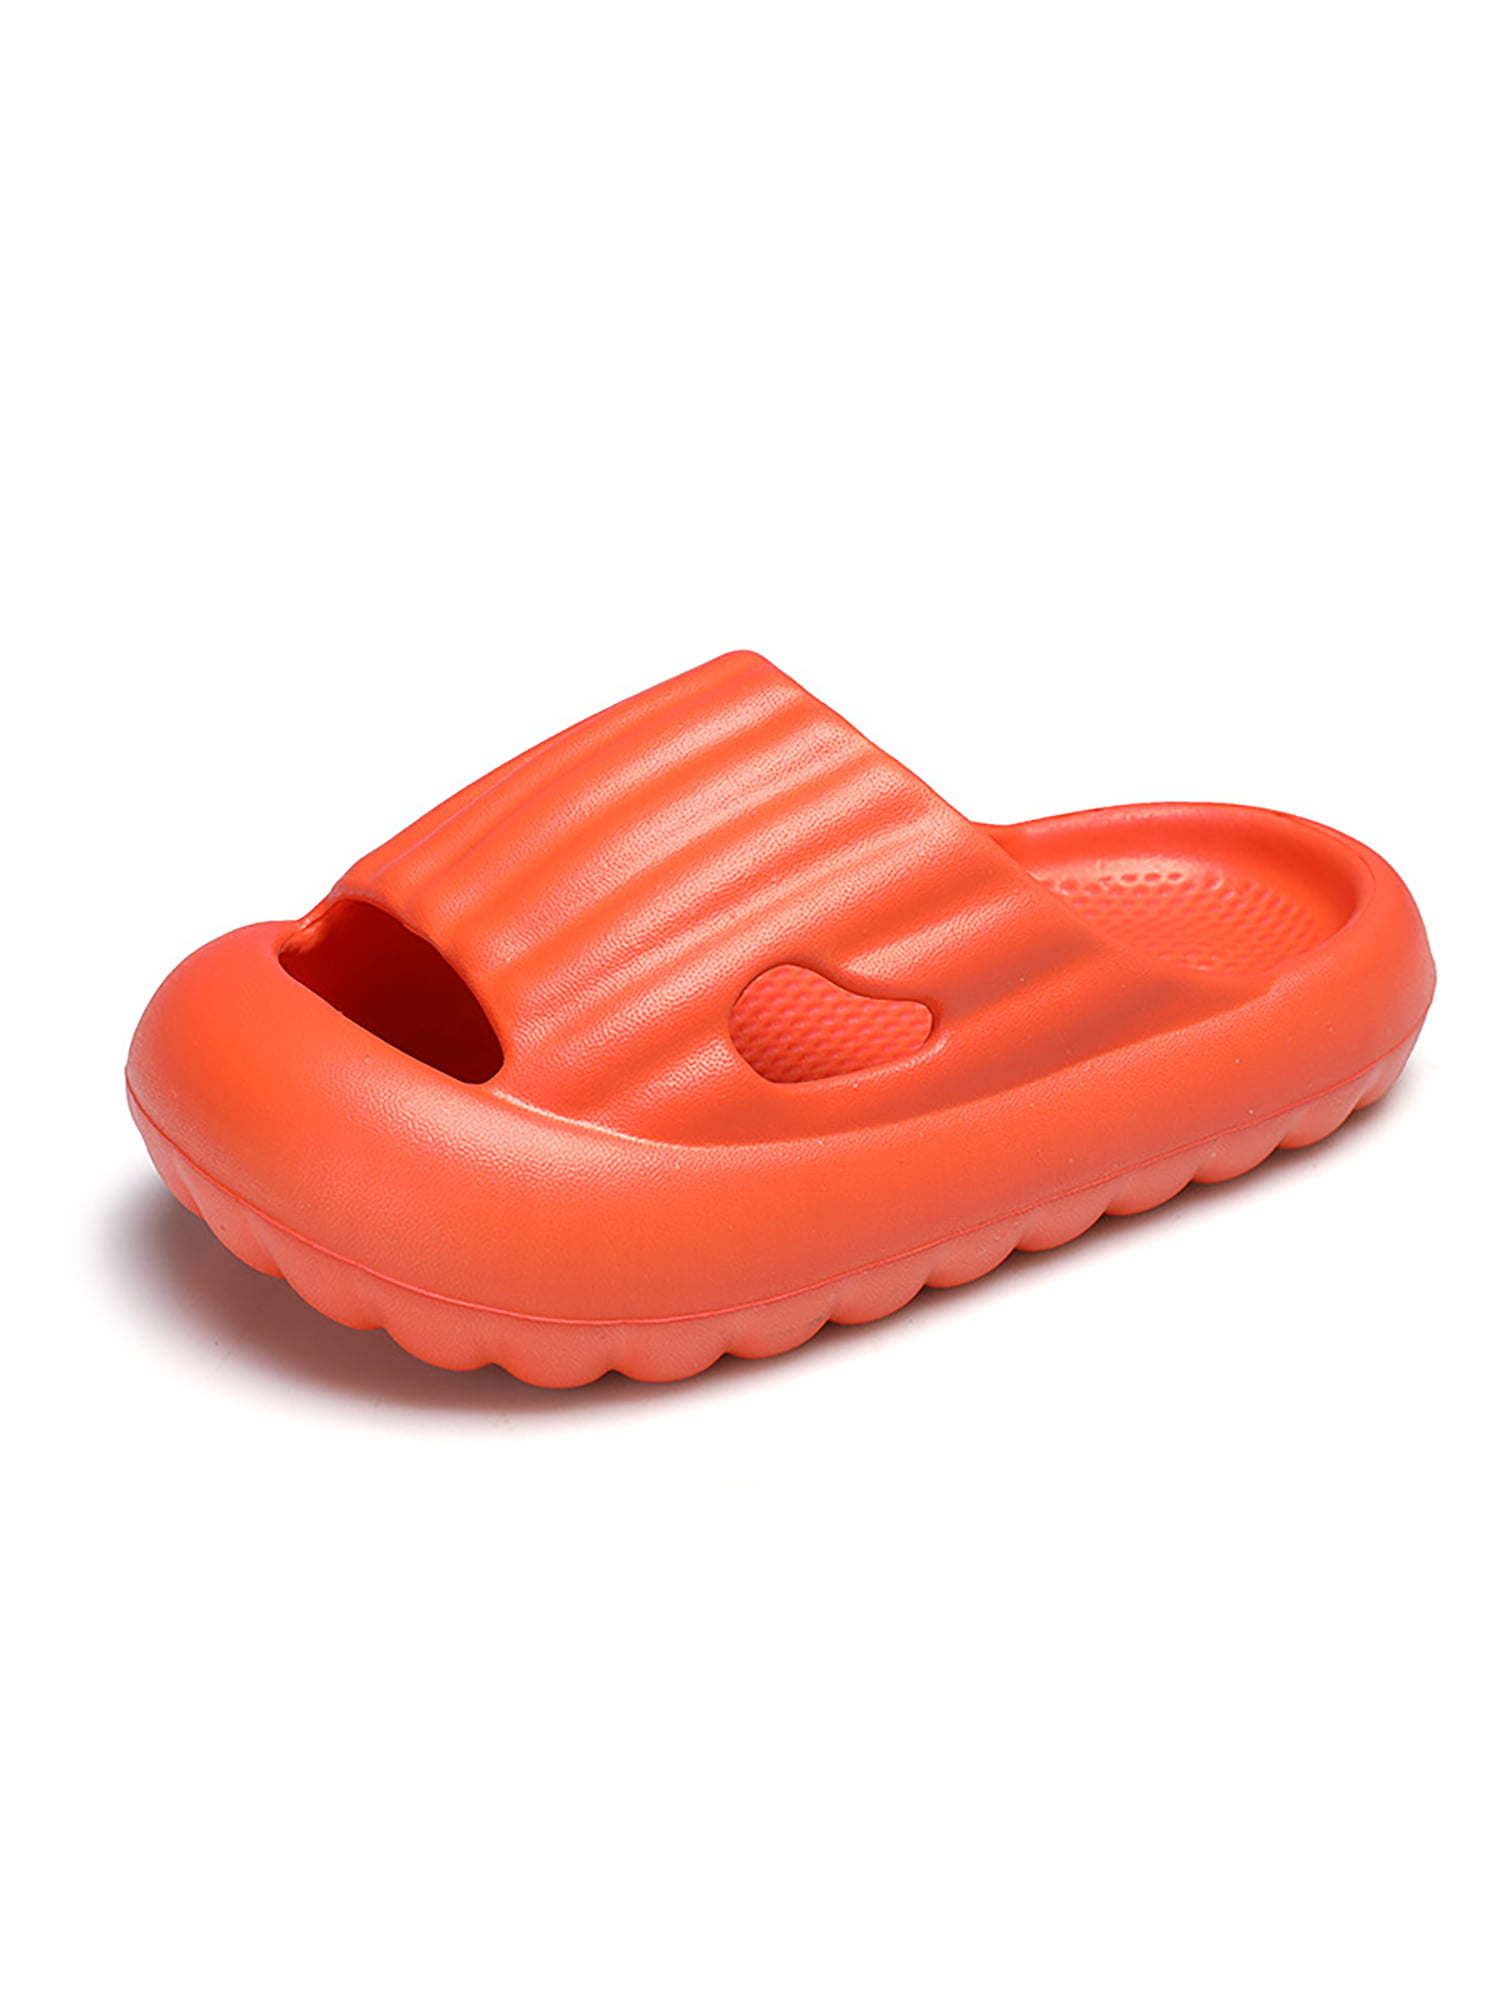 Adult 3D Print Indoor/Outdoor Slippers,Pizza Planet Flat Sandals Shoes 